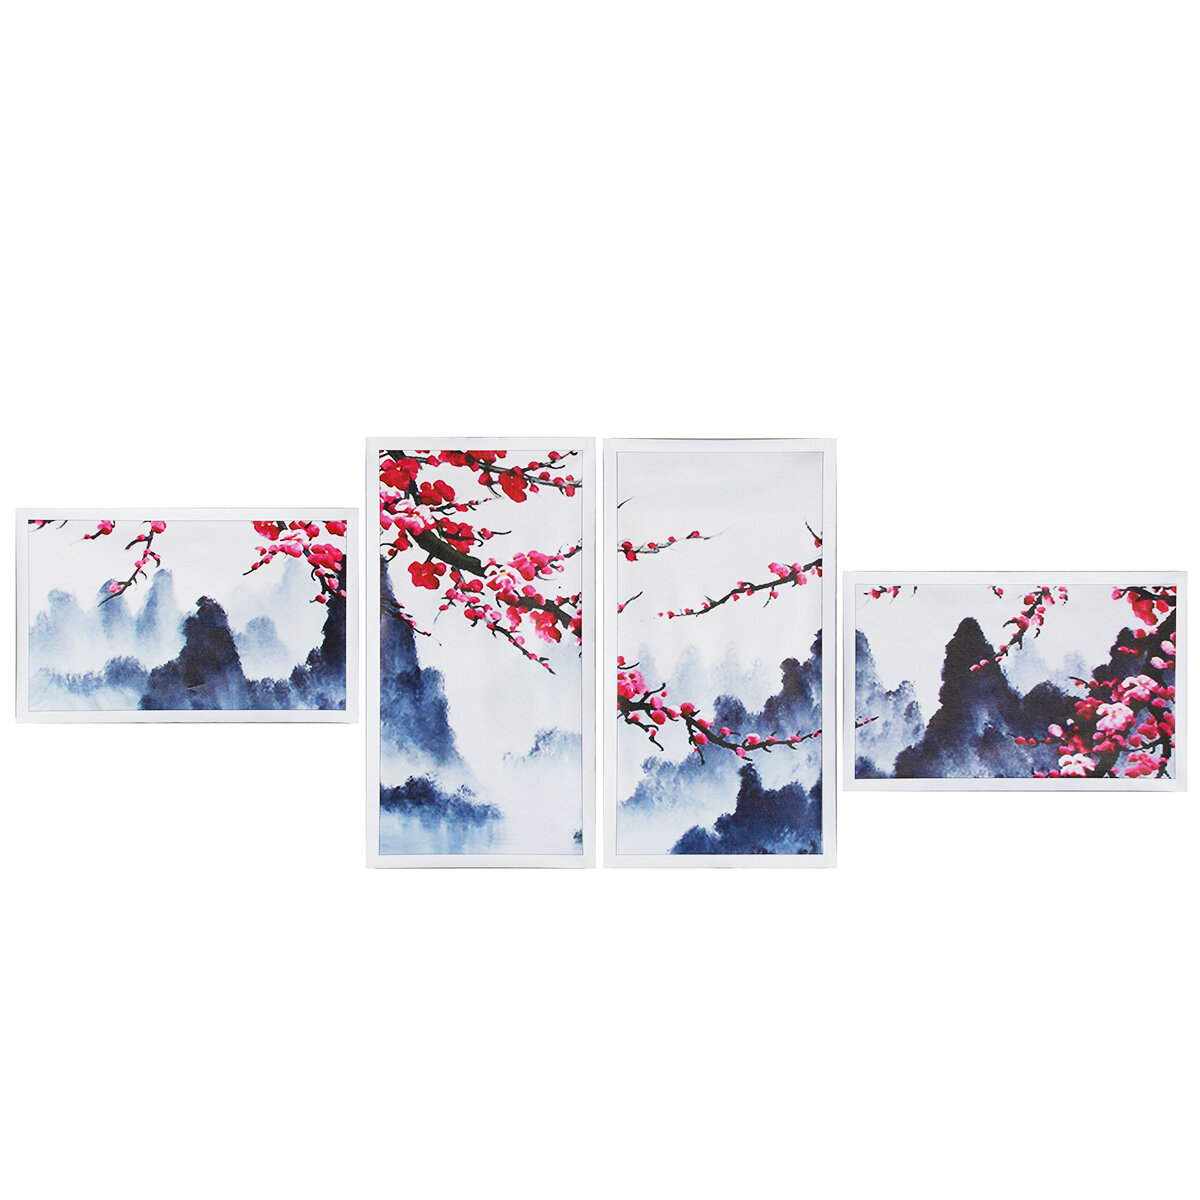 4 Pcs Wall Decorative Painting Modern Abstract Wall Decor Plum Blossom Art Pictures Canvas Prints Ho